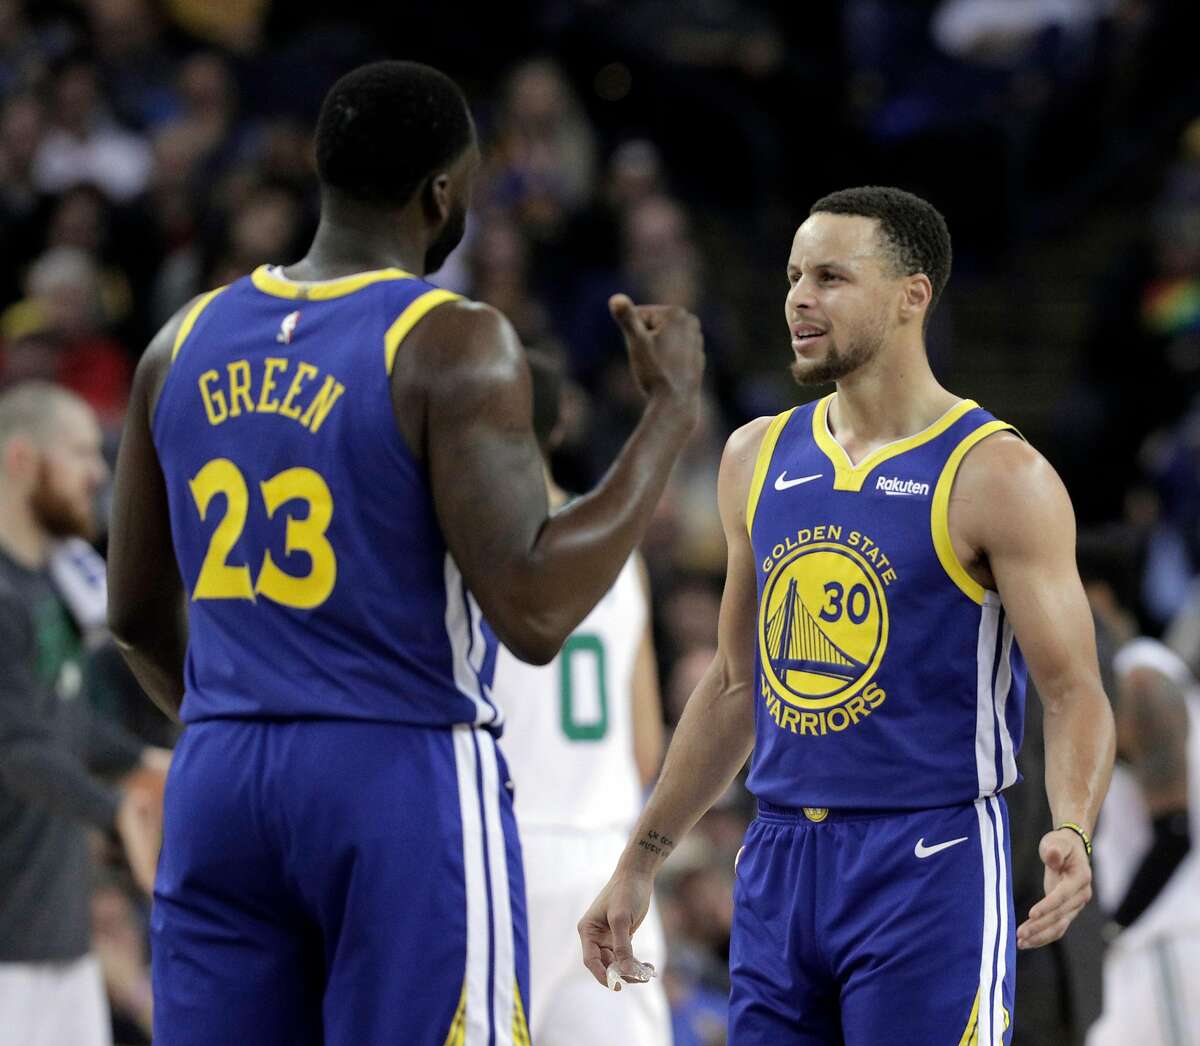 Stephen Curry (30) talks to Draymond Green (23) after Green was called for a questionable foul and argued with the official in the first half as the Golden State Warriors played the Boston Celtics at Oracle Arena in Oakland, Calif., on Tuesday, March 5, 2019.